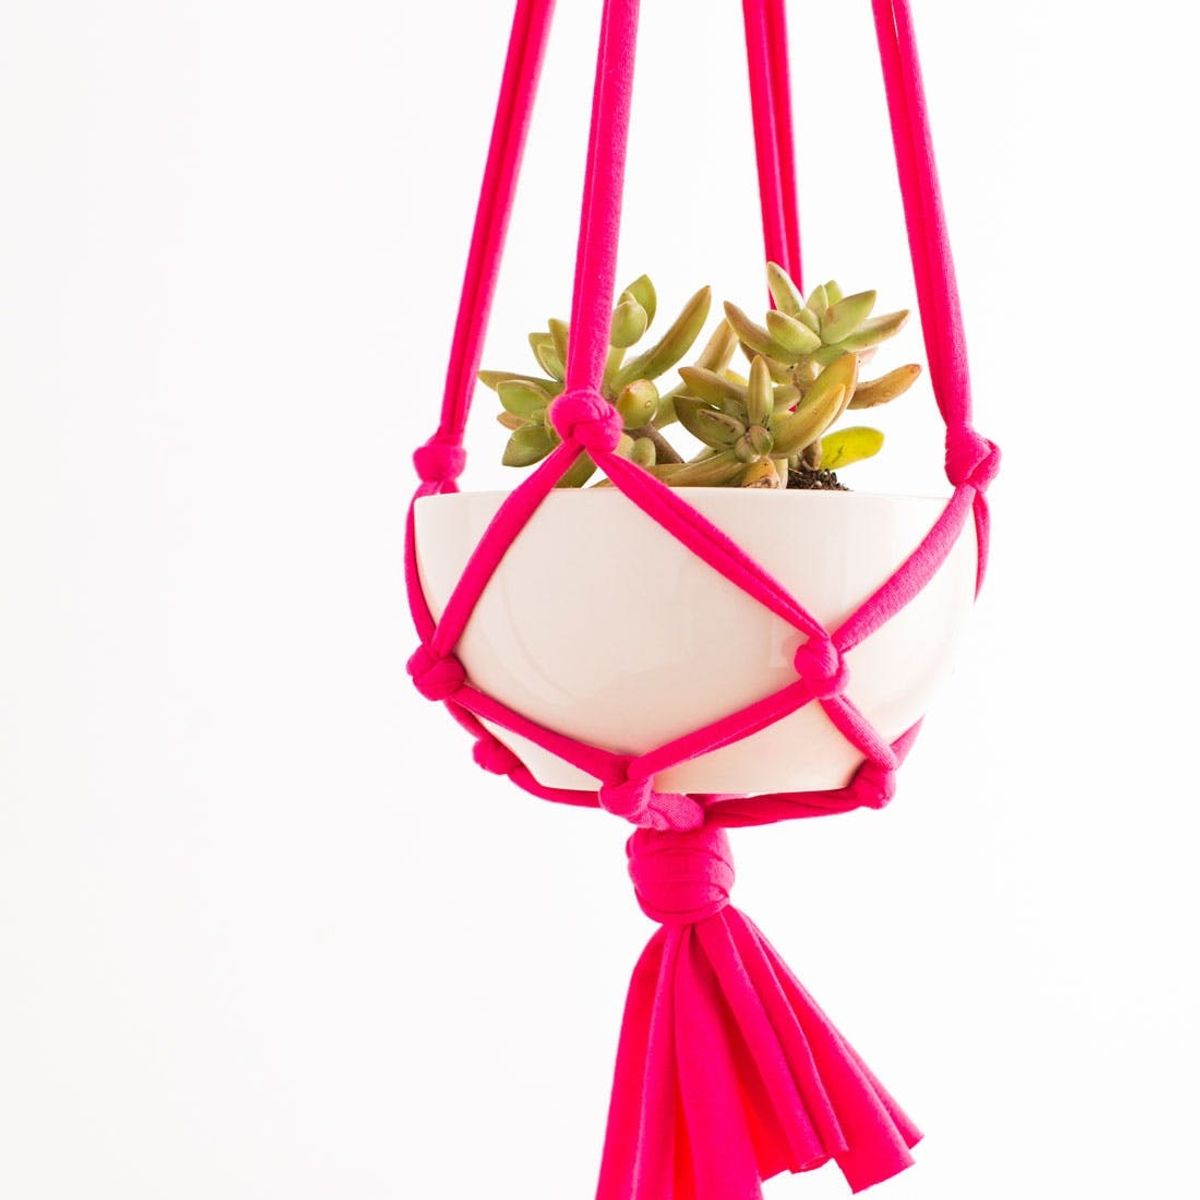 Make These Macrame Hanging Planters in 30 Minutes!